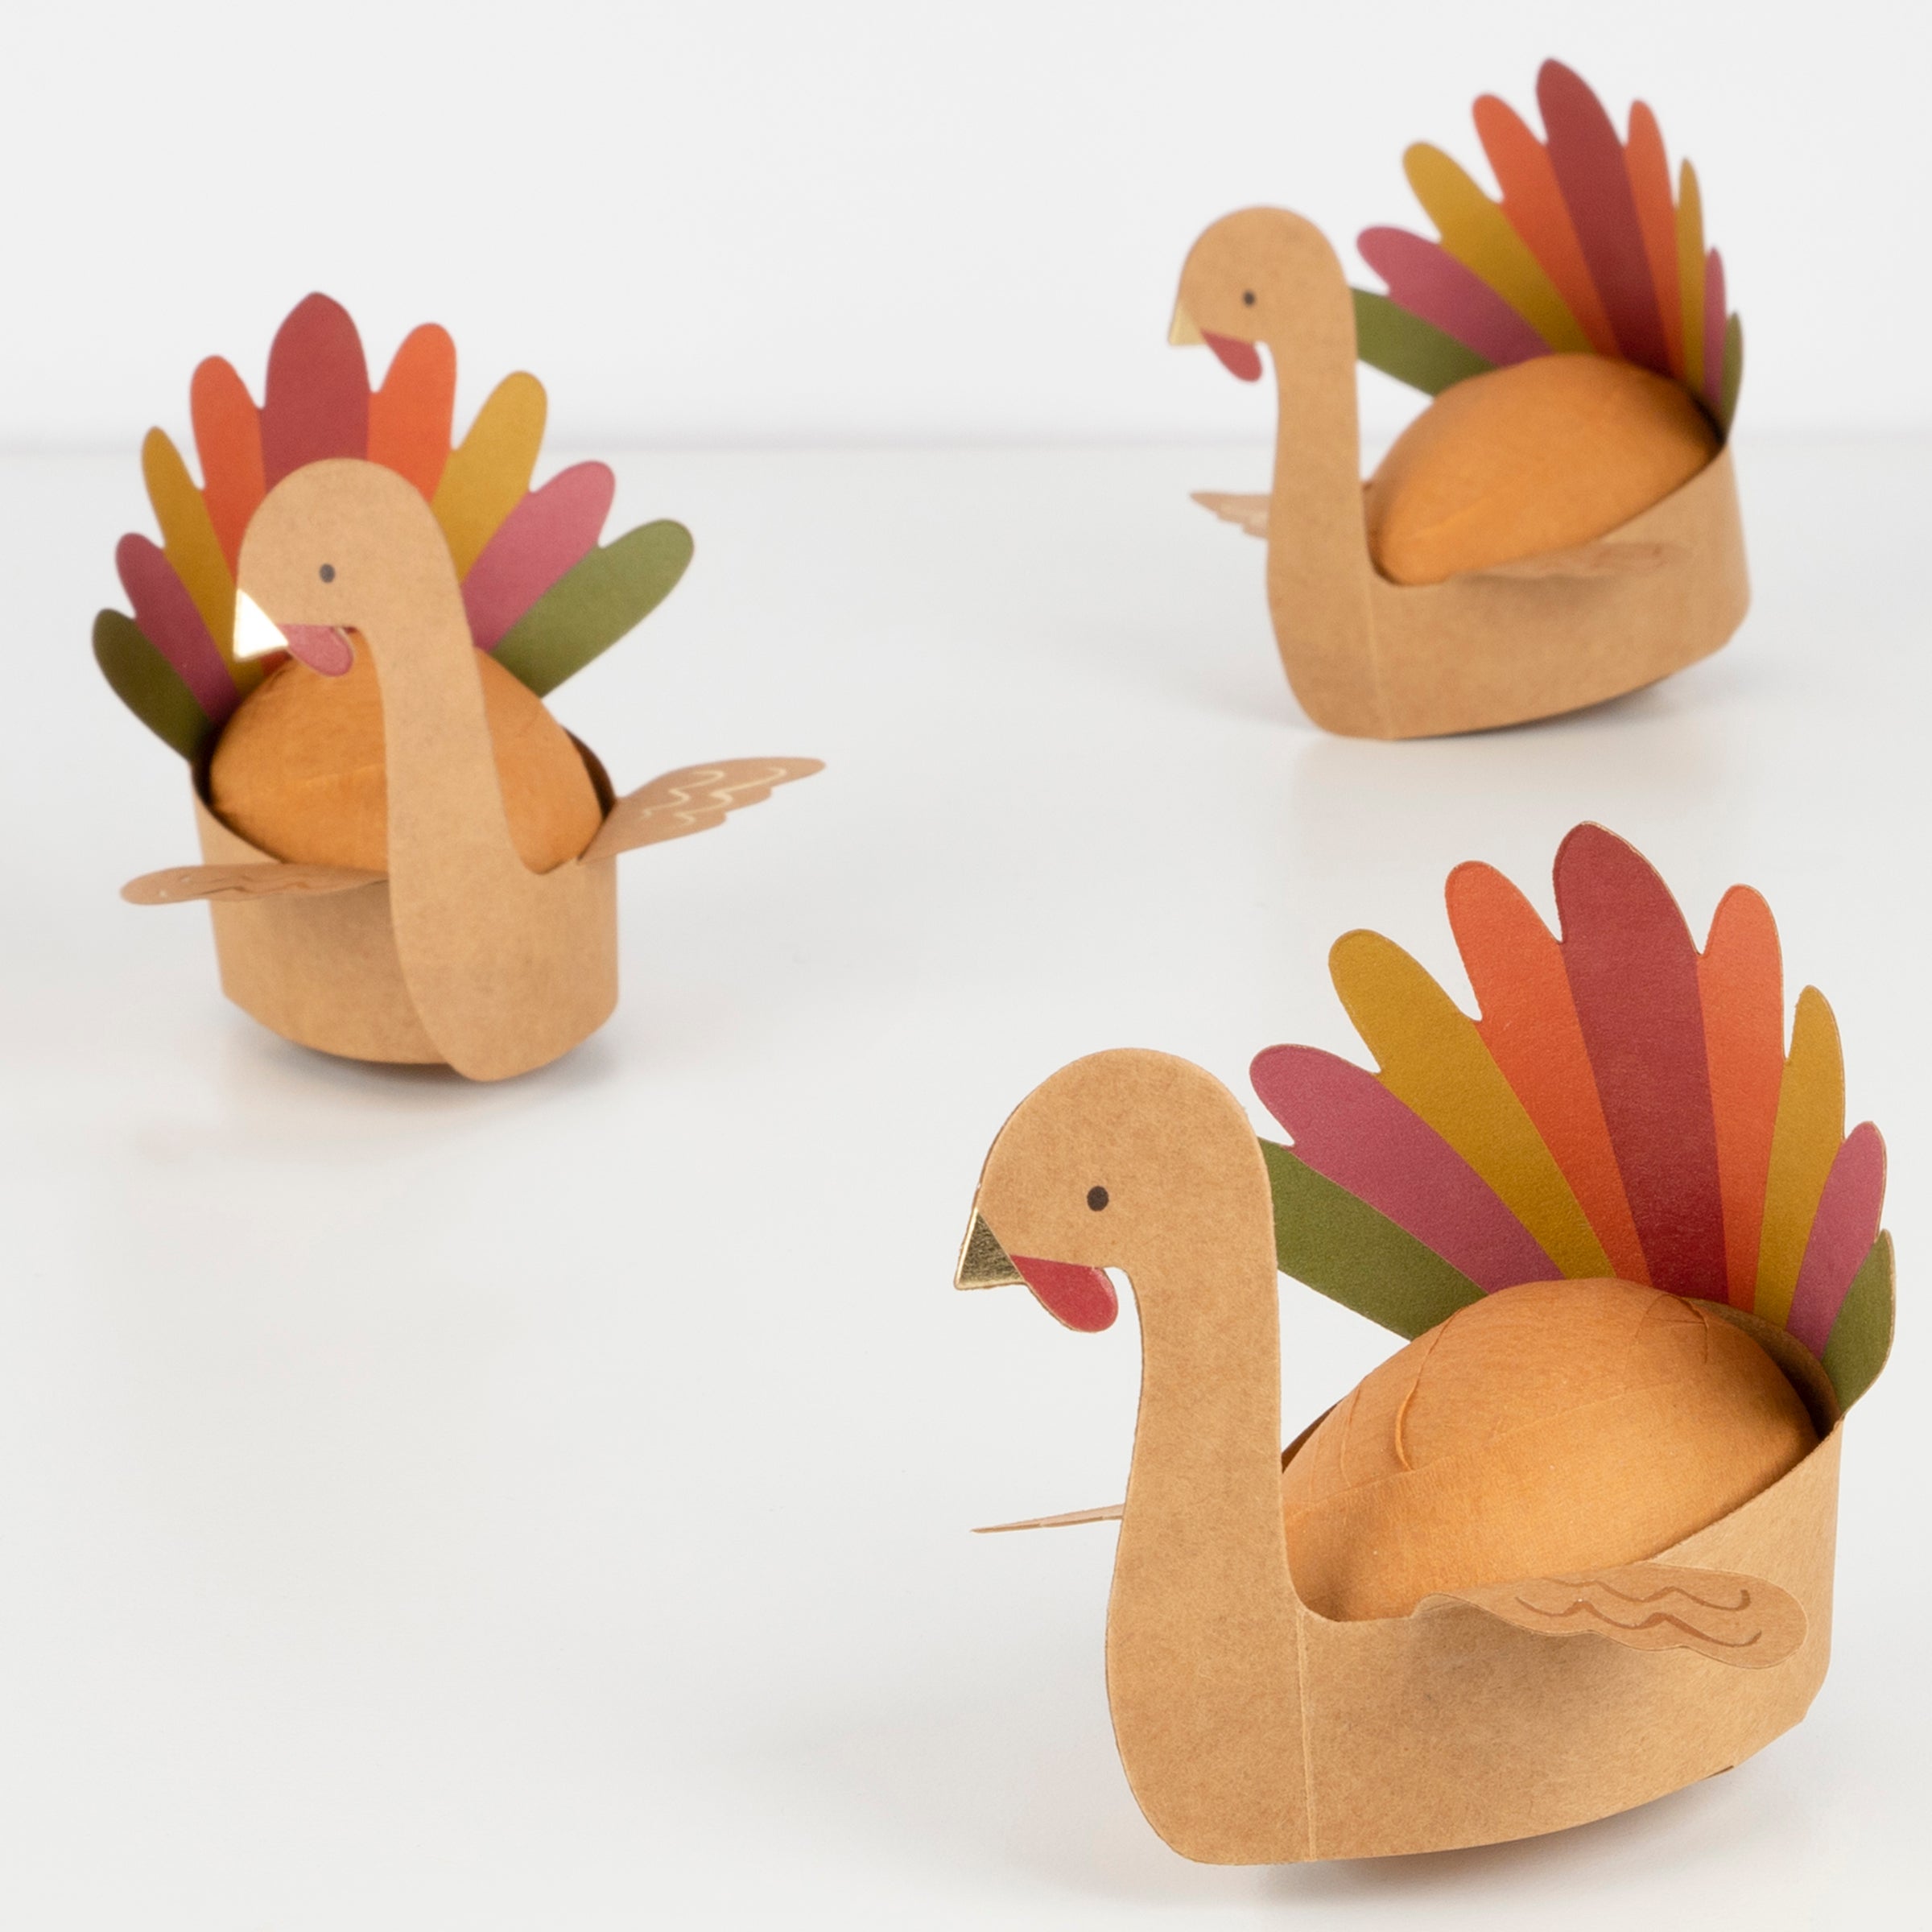 If you're looking for Thanksgiving table decor ideas, then our surprise balls in the shape of turkeys, are a fabulous treat.